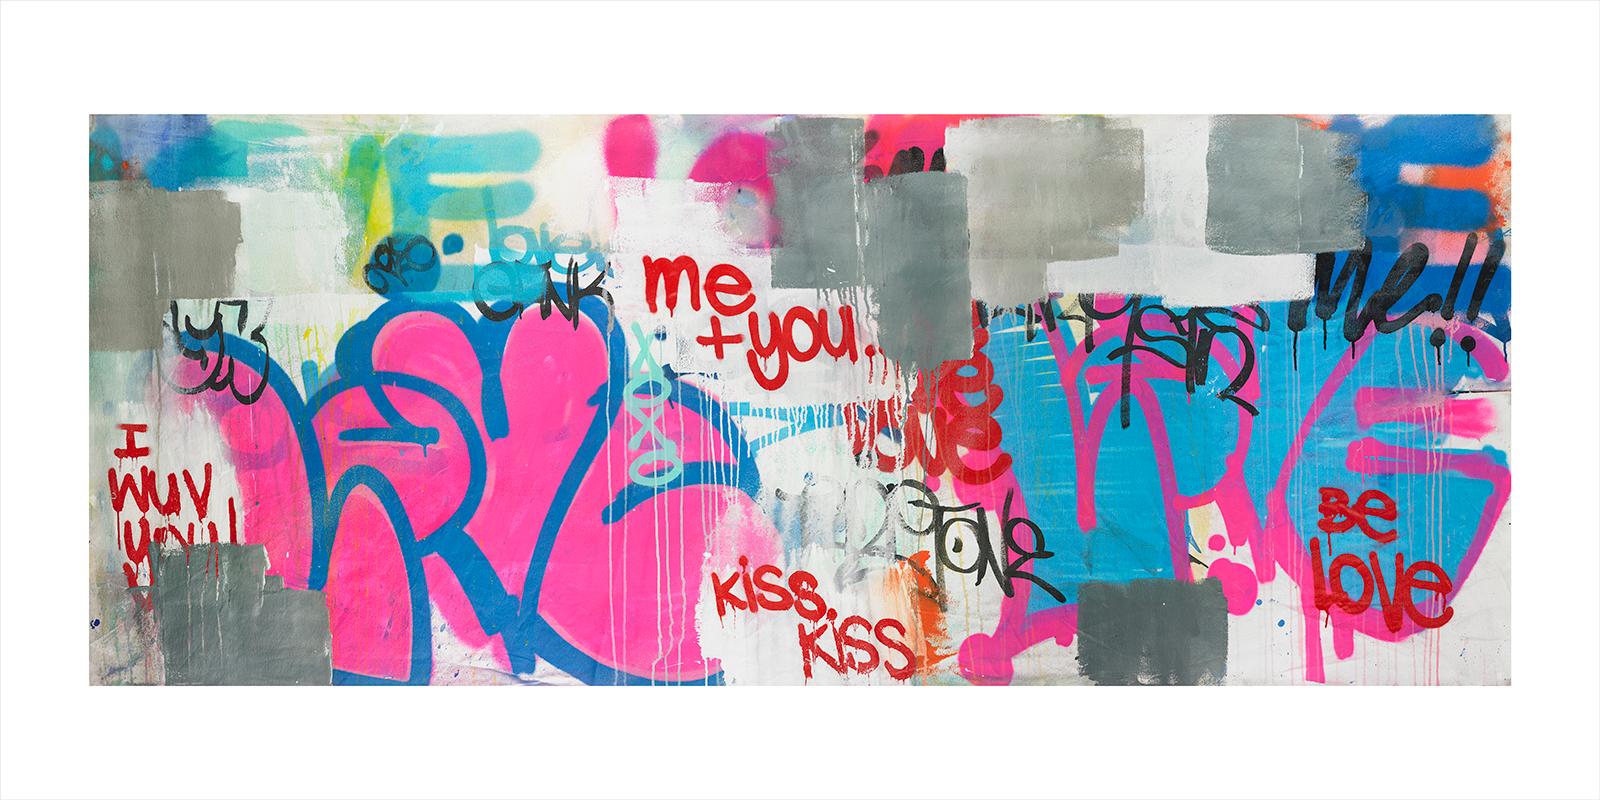 Me + You - Print by Karlos Marquez